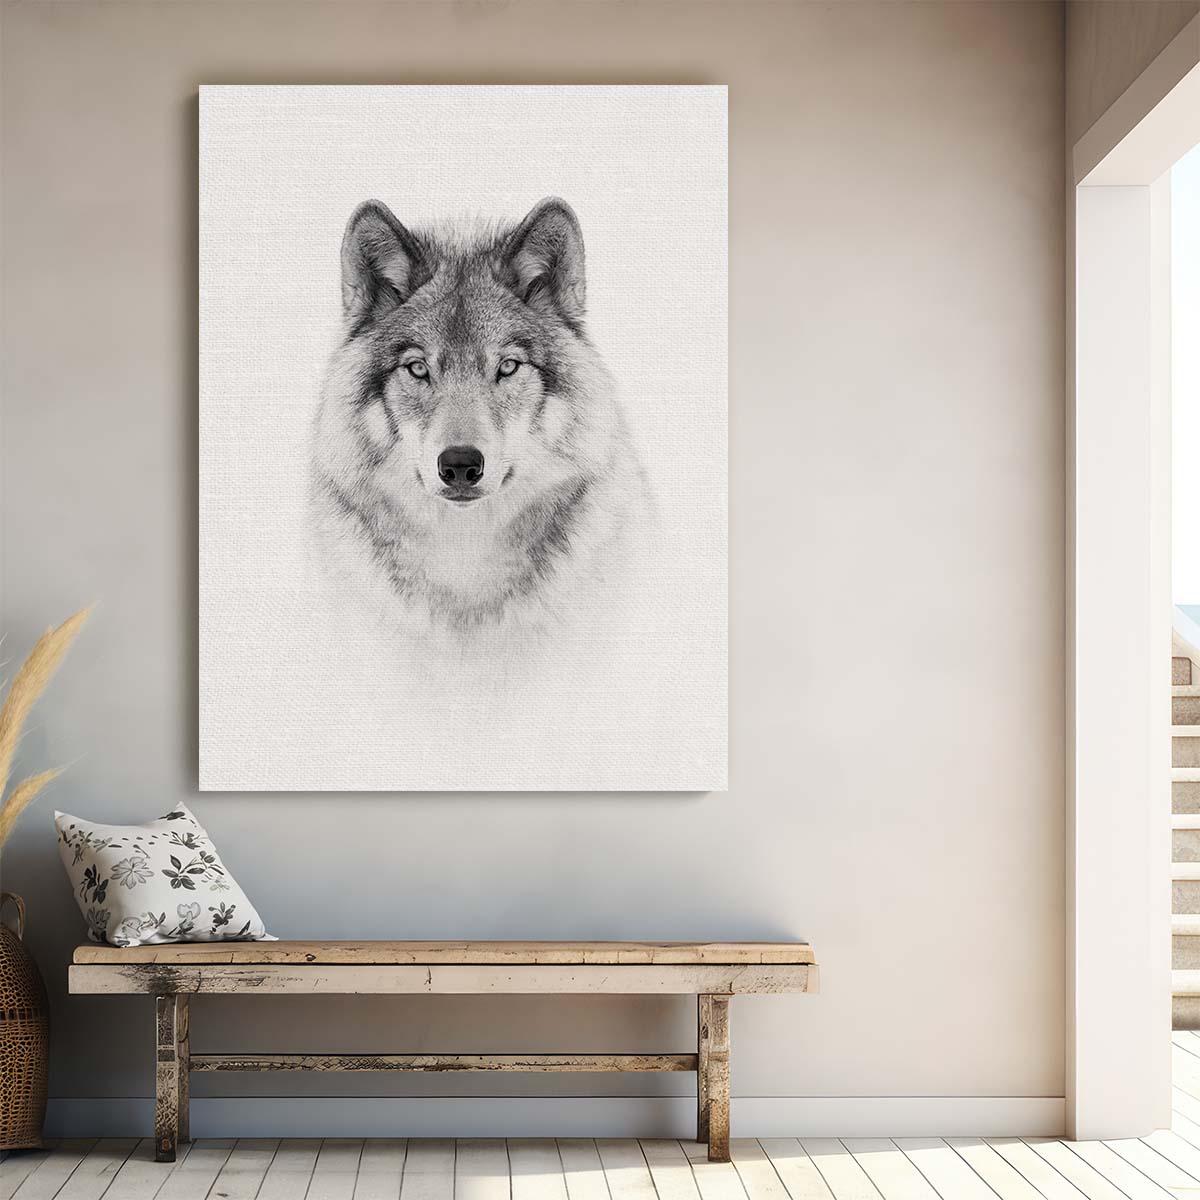 Serene Monochrome Timber Wolf Portrait Photography by Luxuriance Designs, made in USA